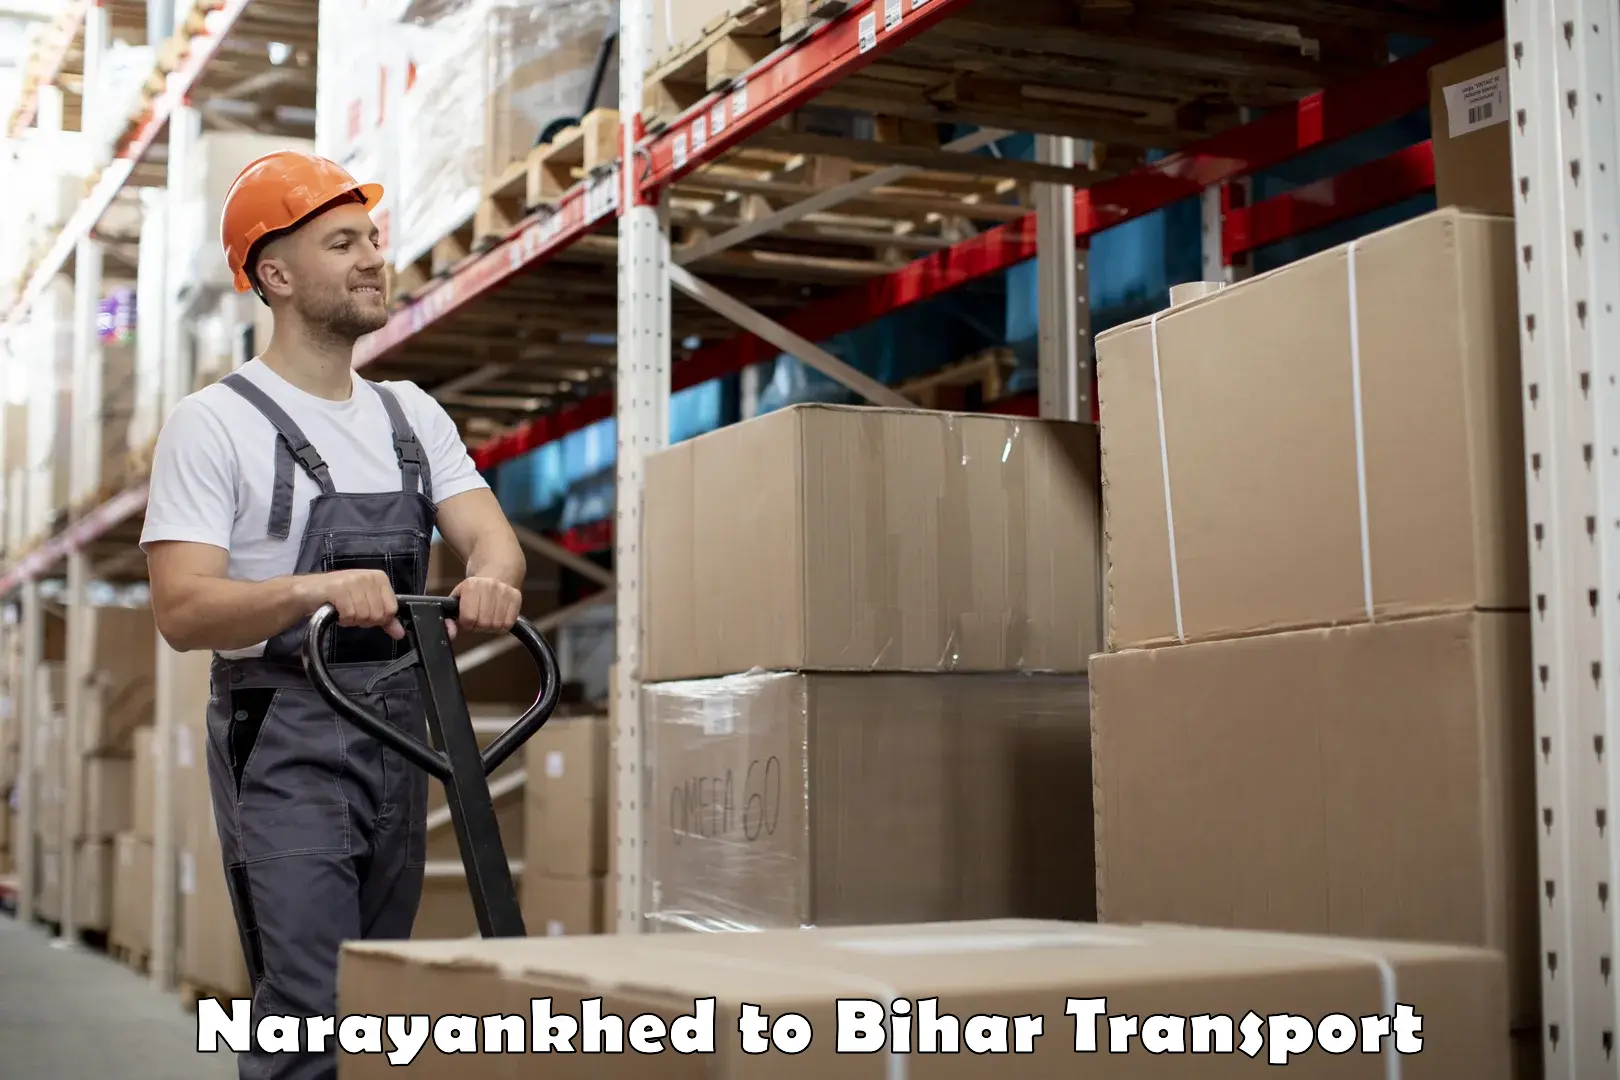 Delivery service Narayankhed to Bihta